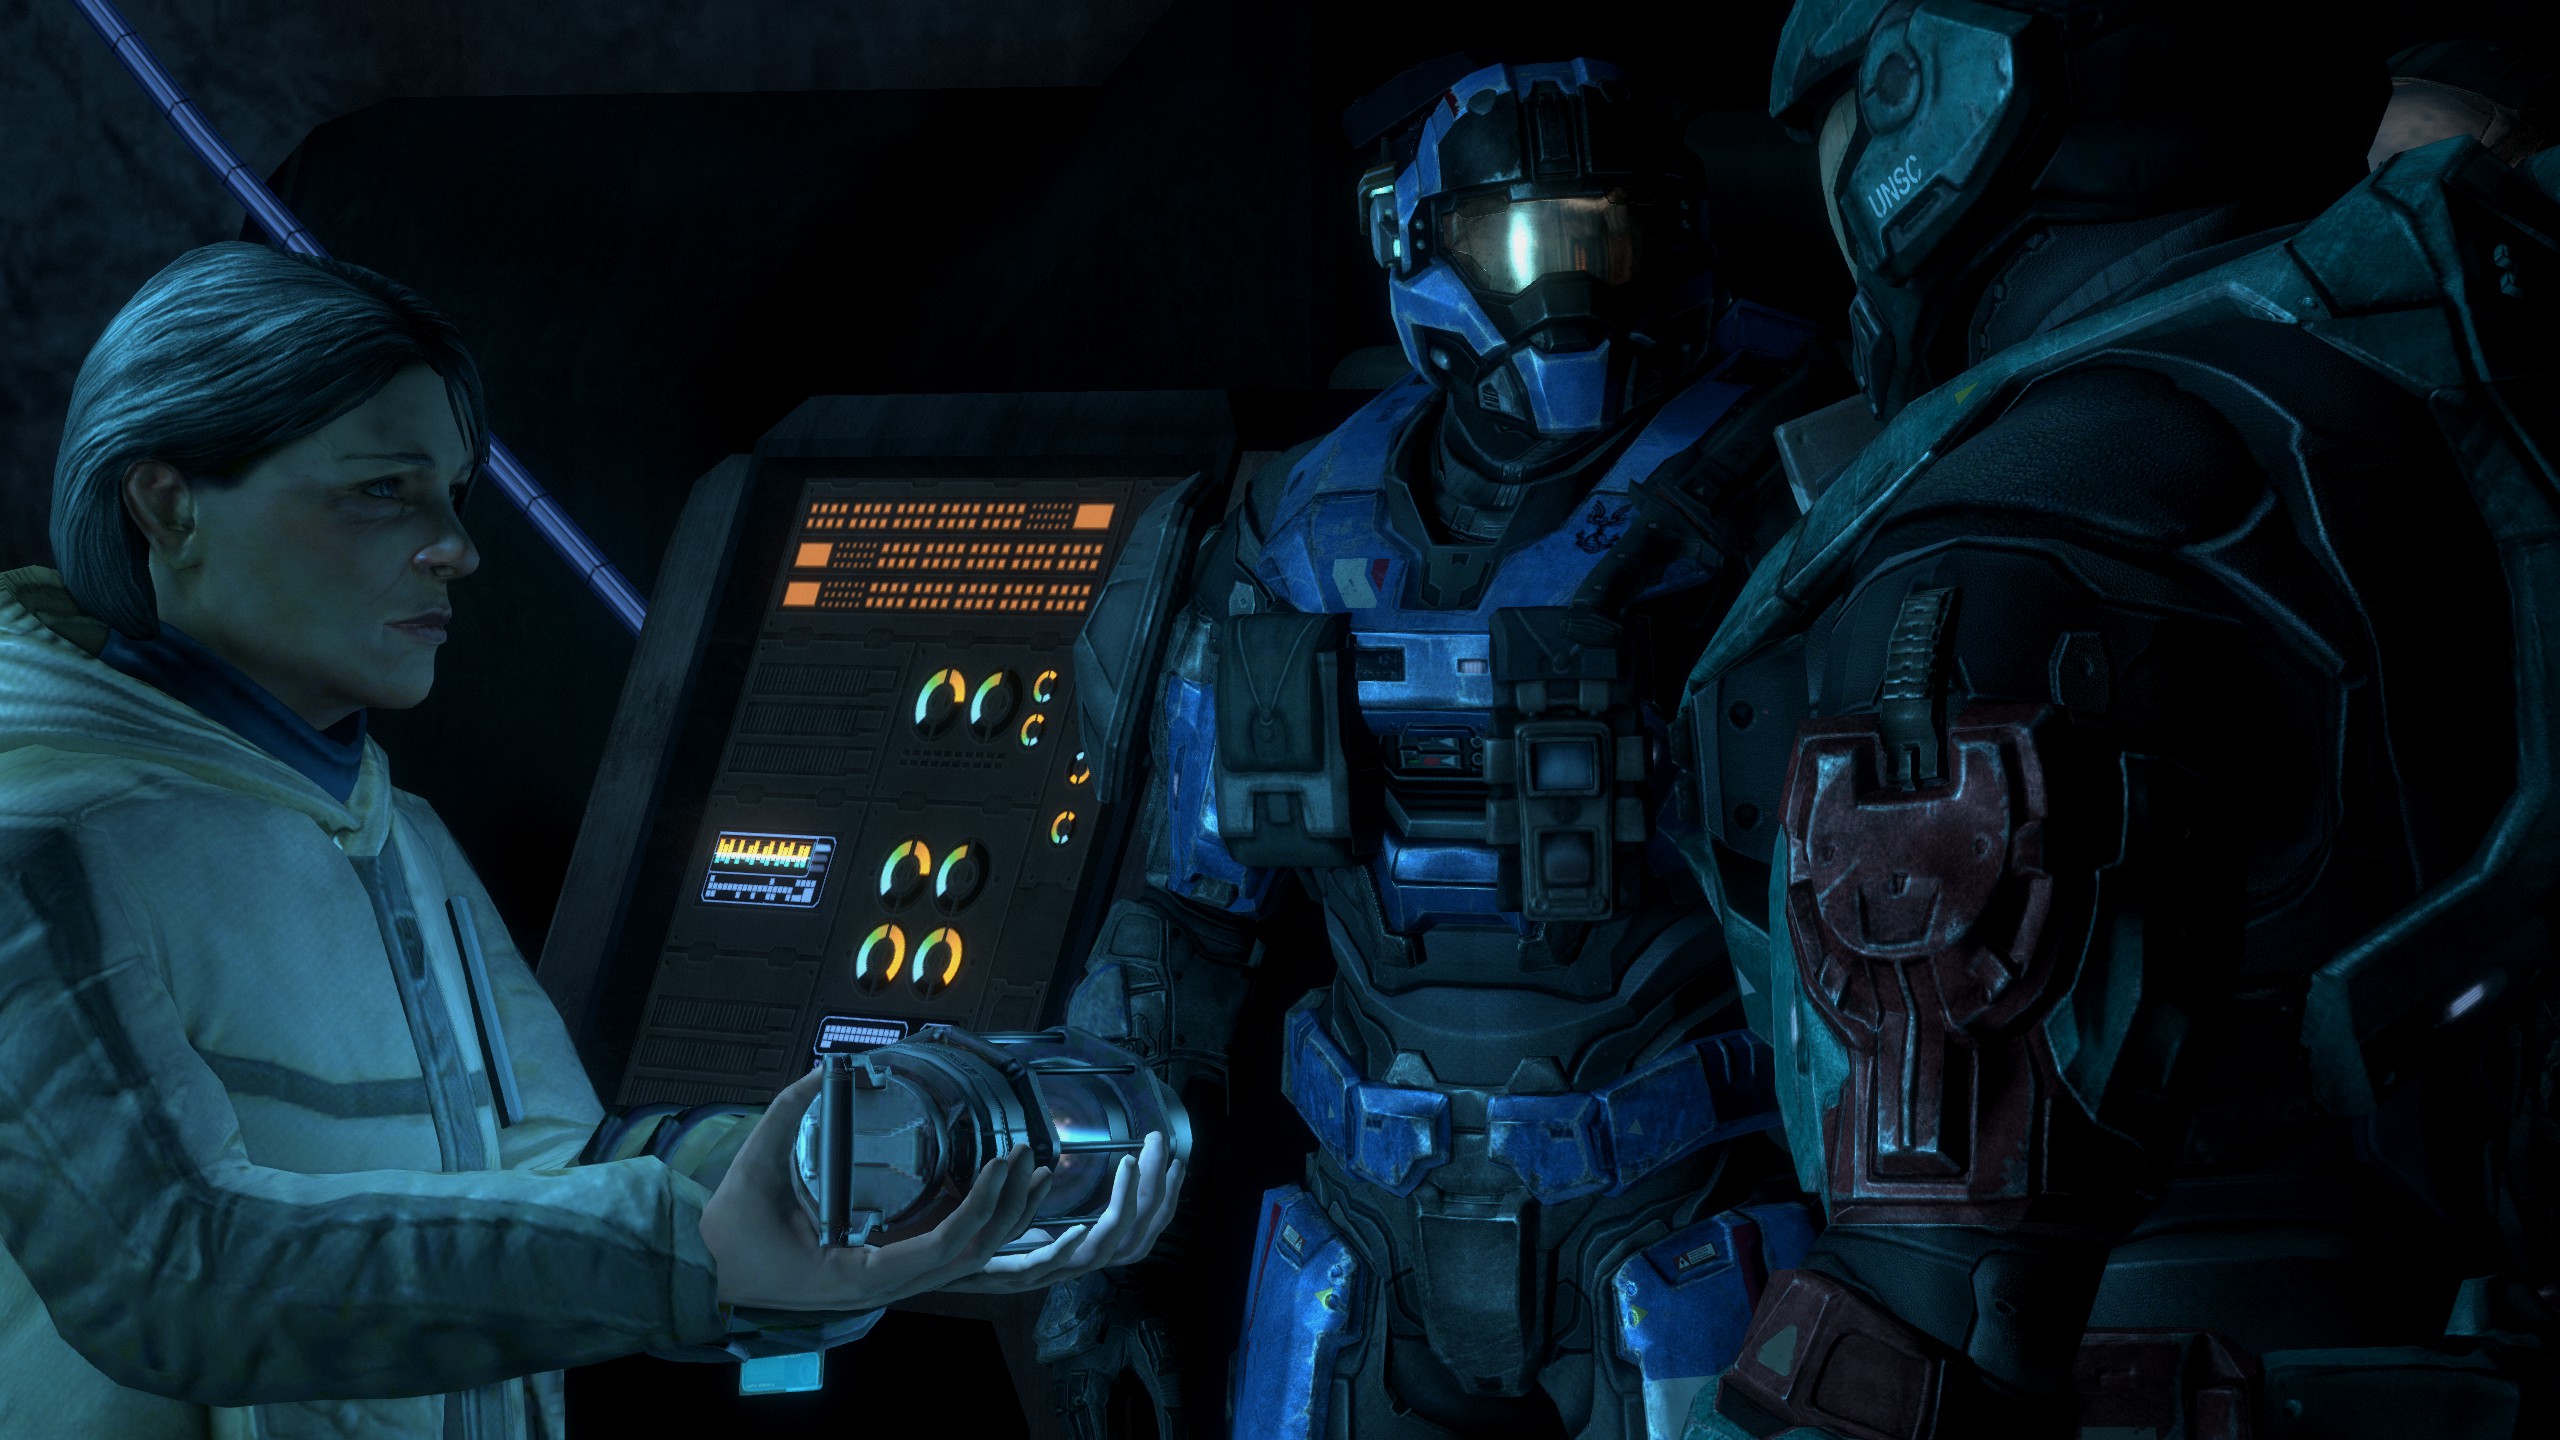 Best co-op games - Halo: Master Chief Collection - Two Spartans to to another human character